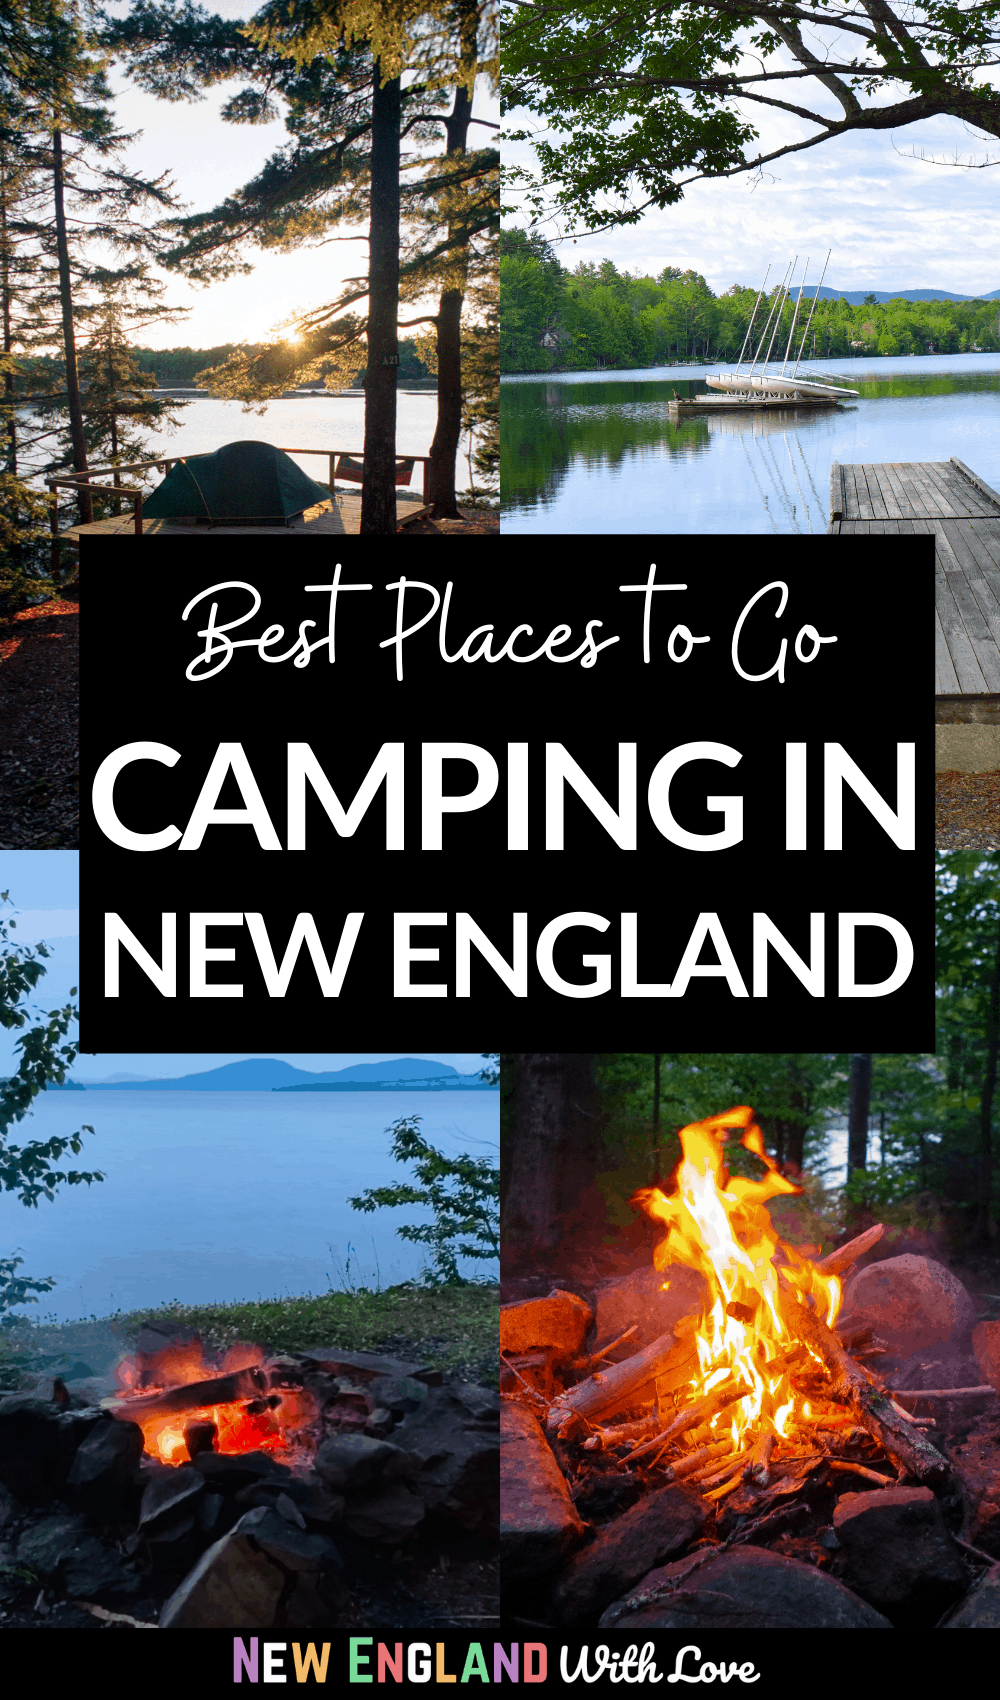 Pinterest graphic reading "Best Places to Go CAMPING IN NEW ENGLAND"